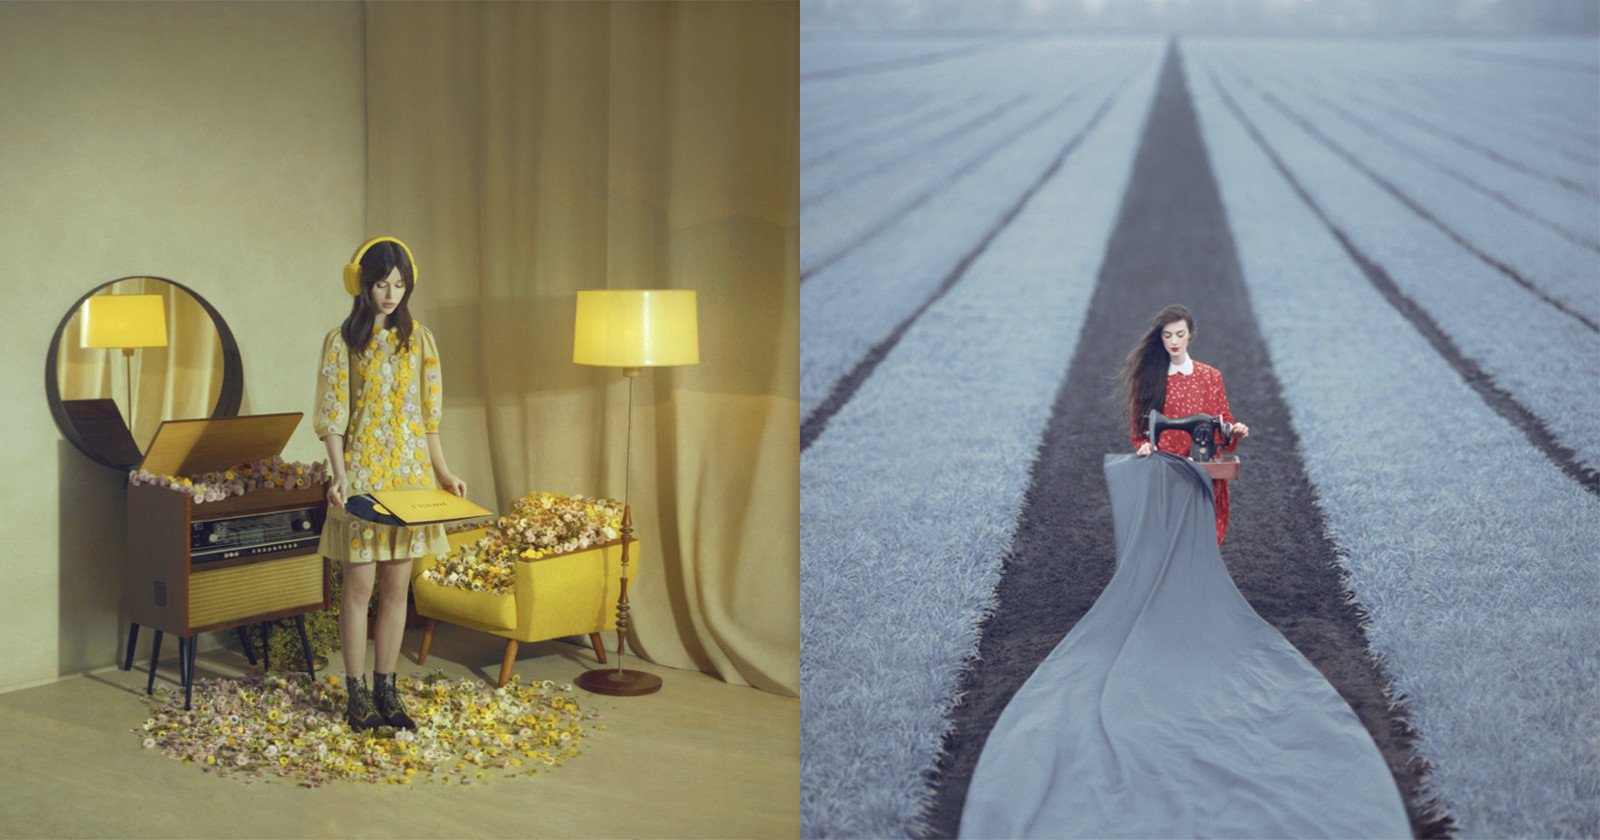 Photographers Surreal Images Look Like Snapshots Out of Dreams